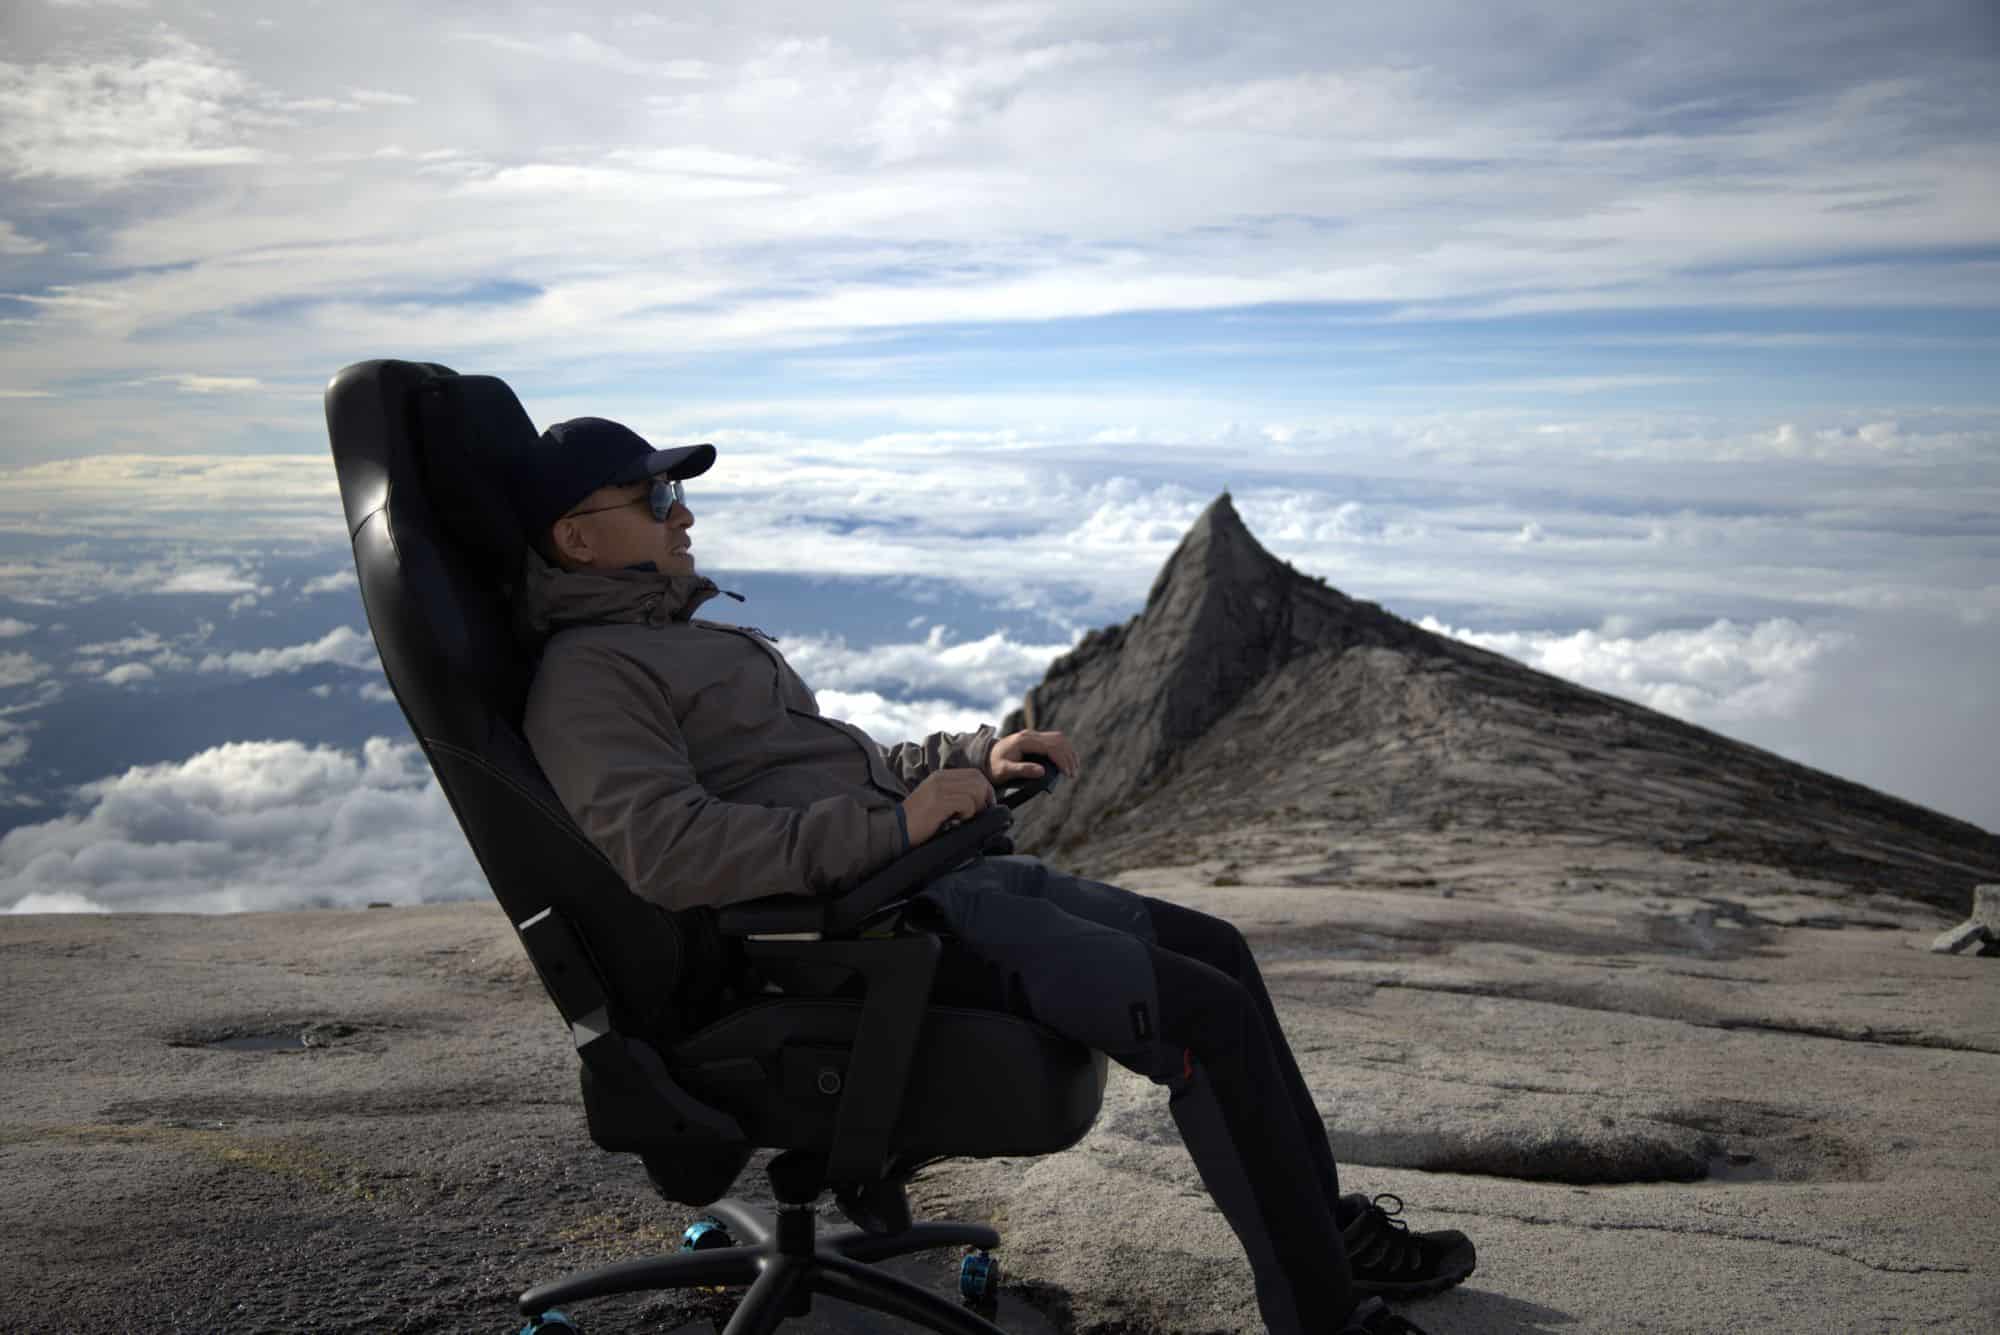 Taking Quality Lumbar Support to New Heights: Zenia, the World’s First Ever Cordless Massage Chair Debuts on the Peak of Mount Kinabalu